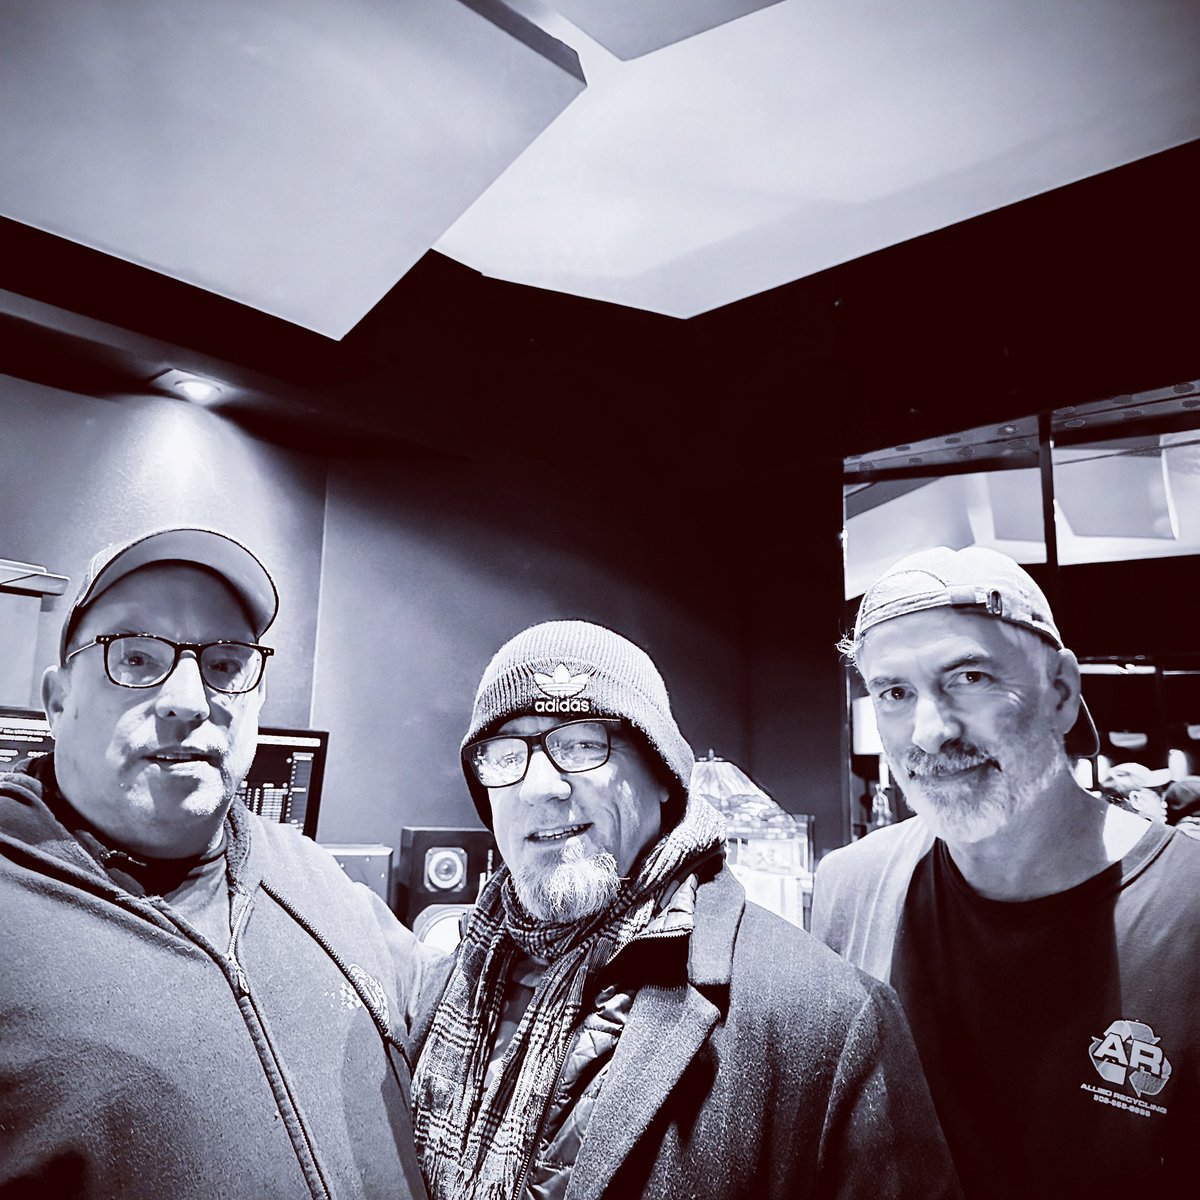 George James T Maze - drum an bass day in honor of our good friend Ted  Condo will miss recording with you #bostonmusic #rock #records #recordingstudios #neoteck #newmusic #give #galaxyparkstudios